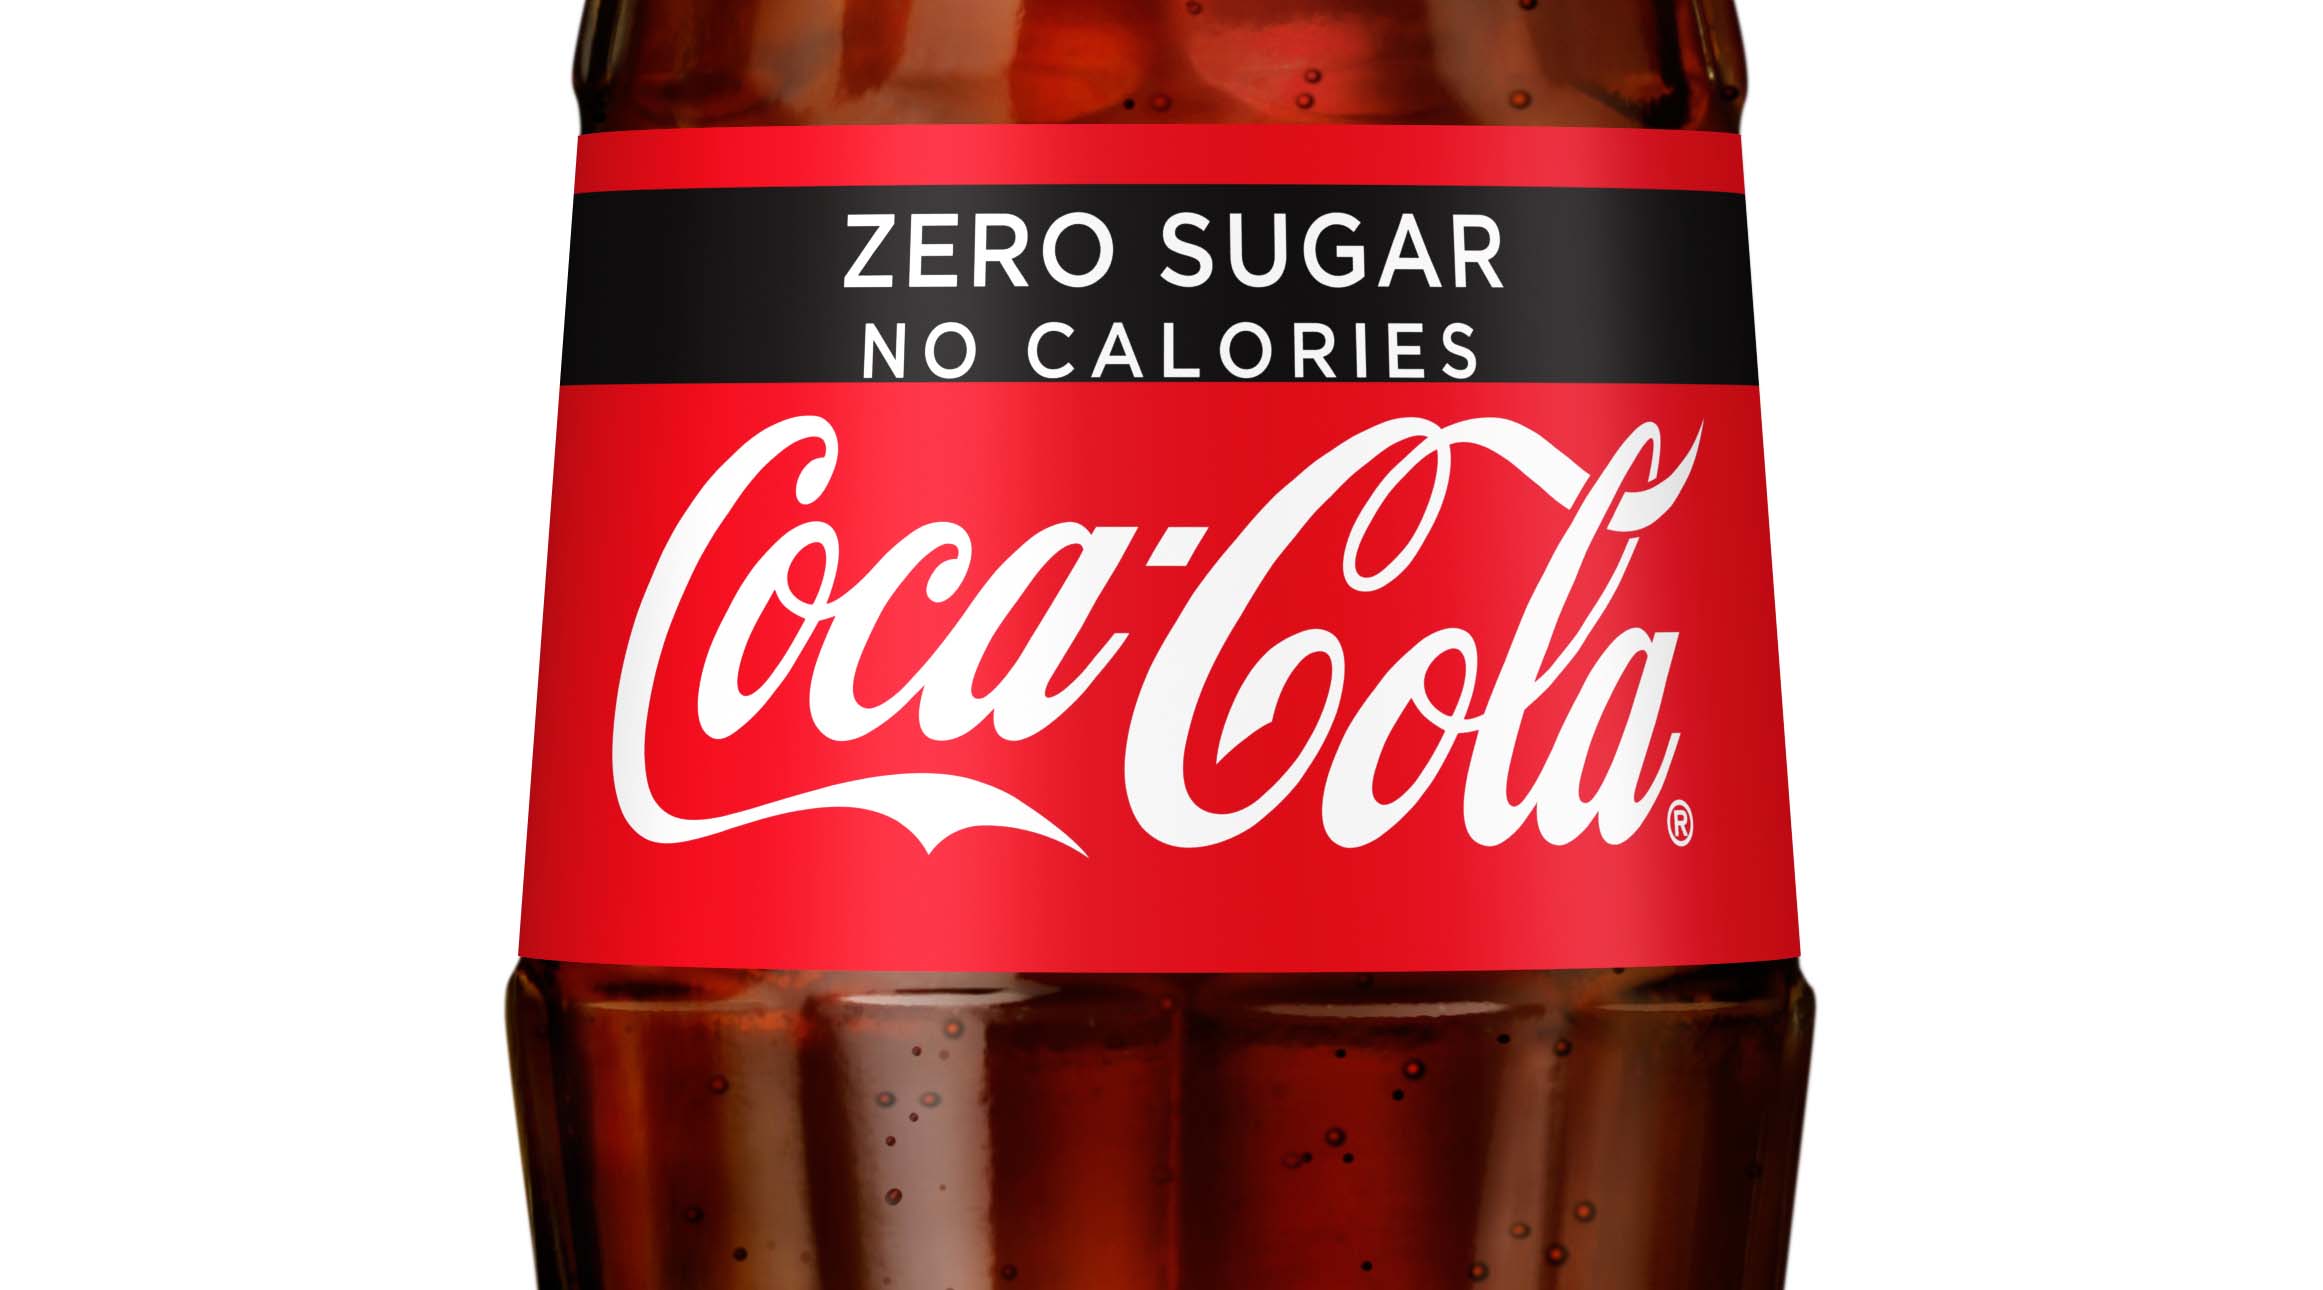 Coca-Cola has revealed a new design for the Coca-Cola range featuring new-look packaging for Coca-Cola and Coca-Cola zero sugar.